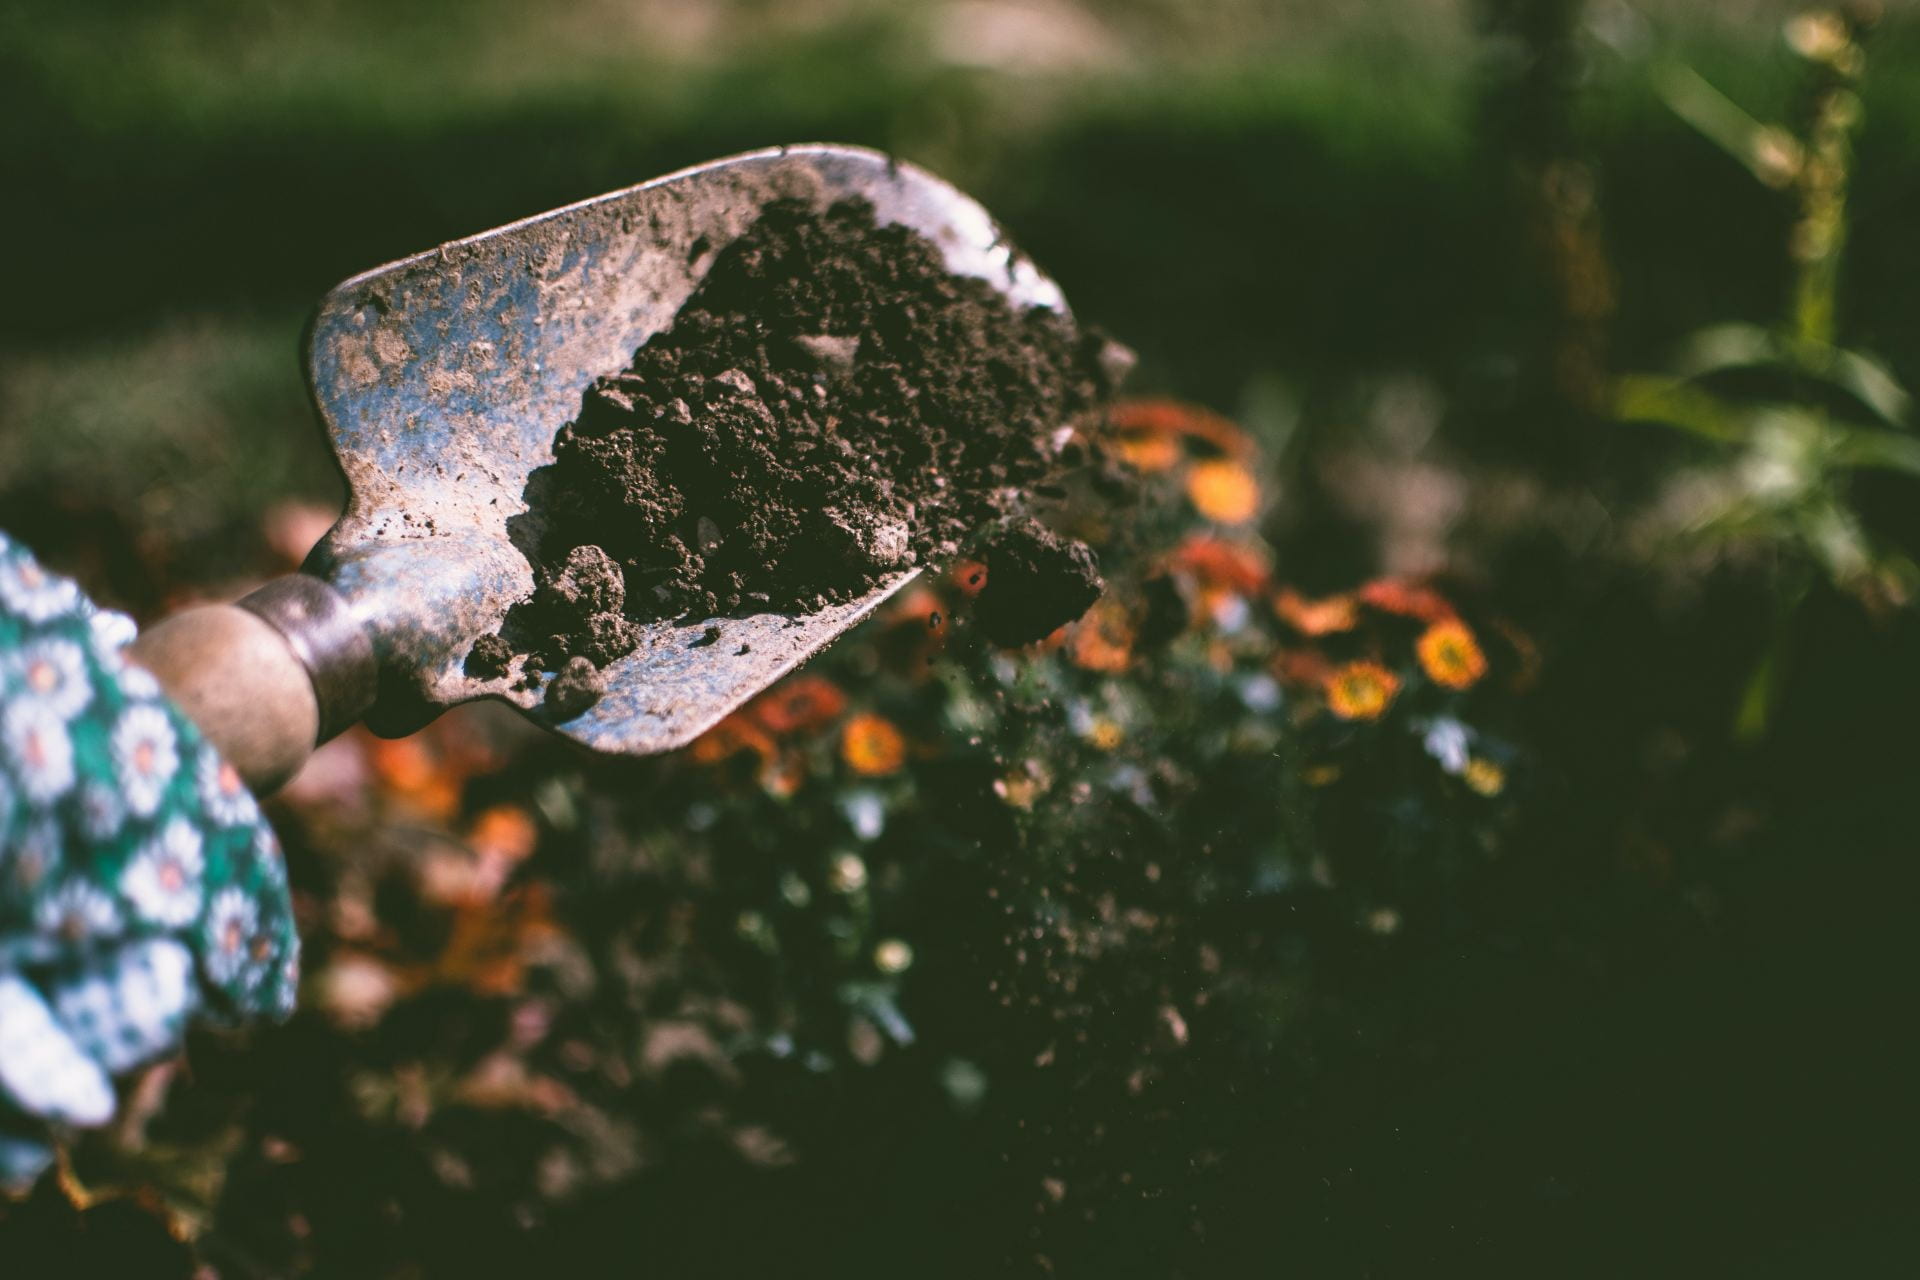  A photo of a shovel dropping seeds and soil in a garden with flourishing plants in the background. 